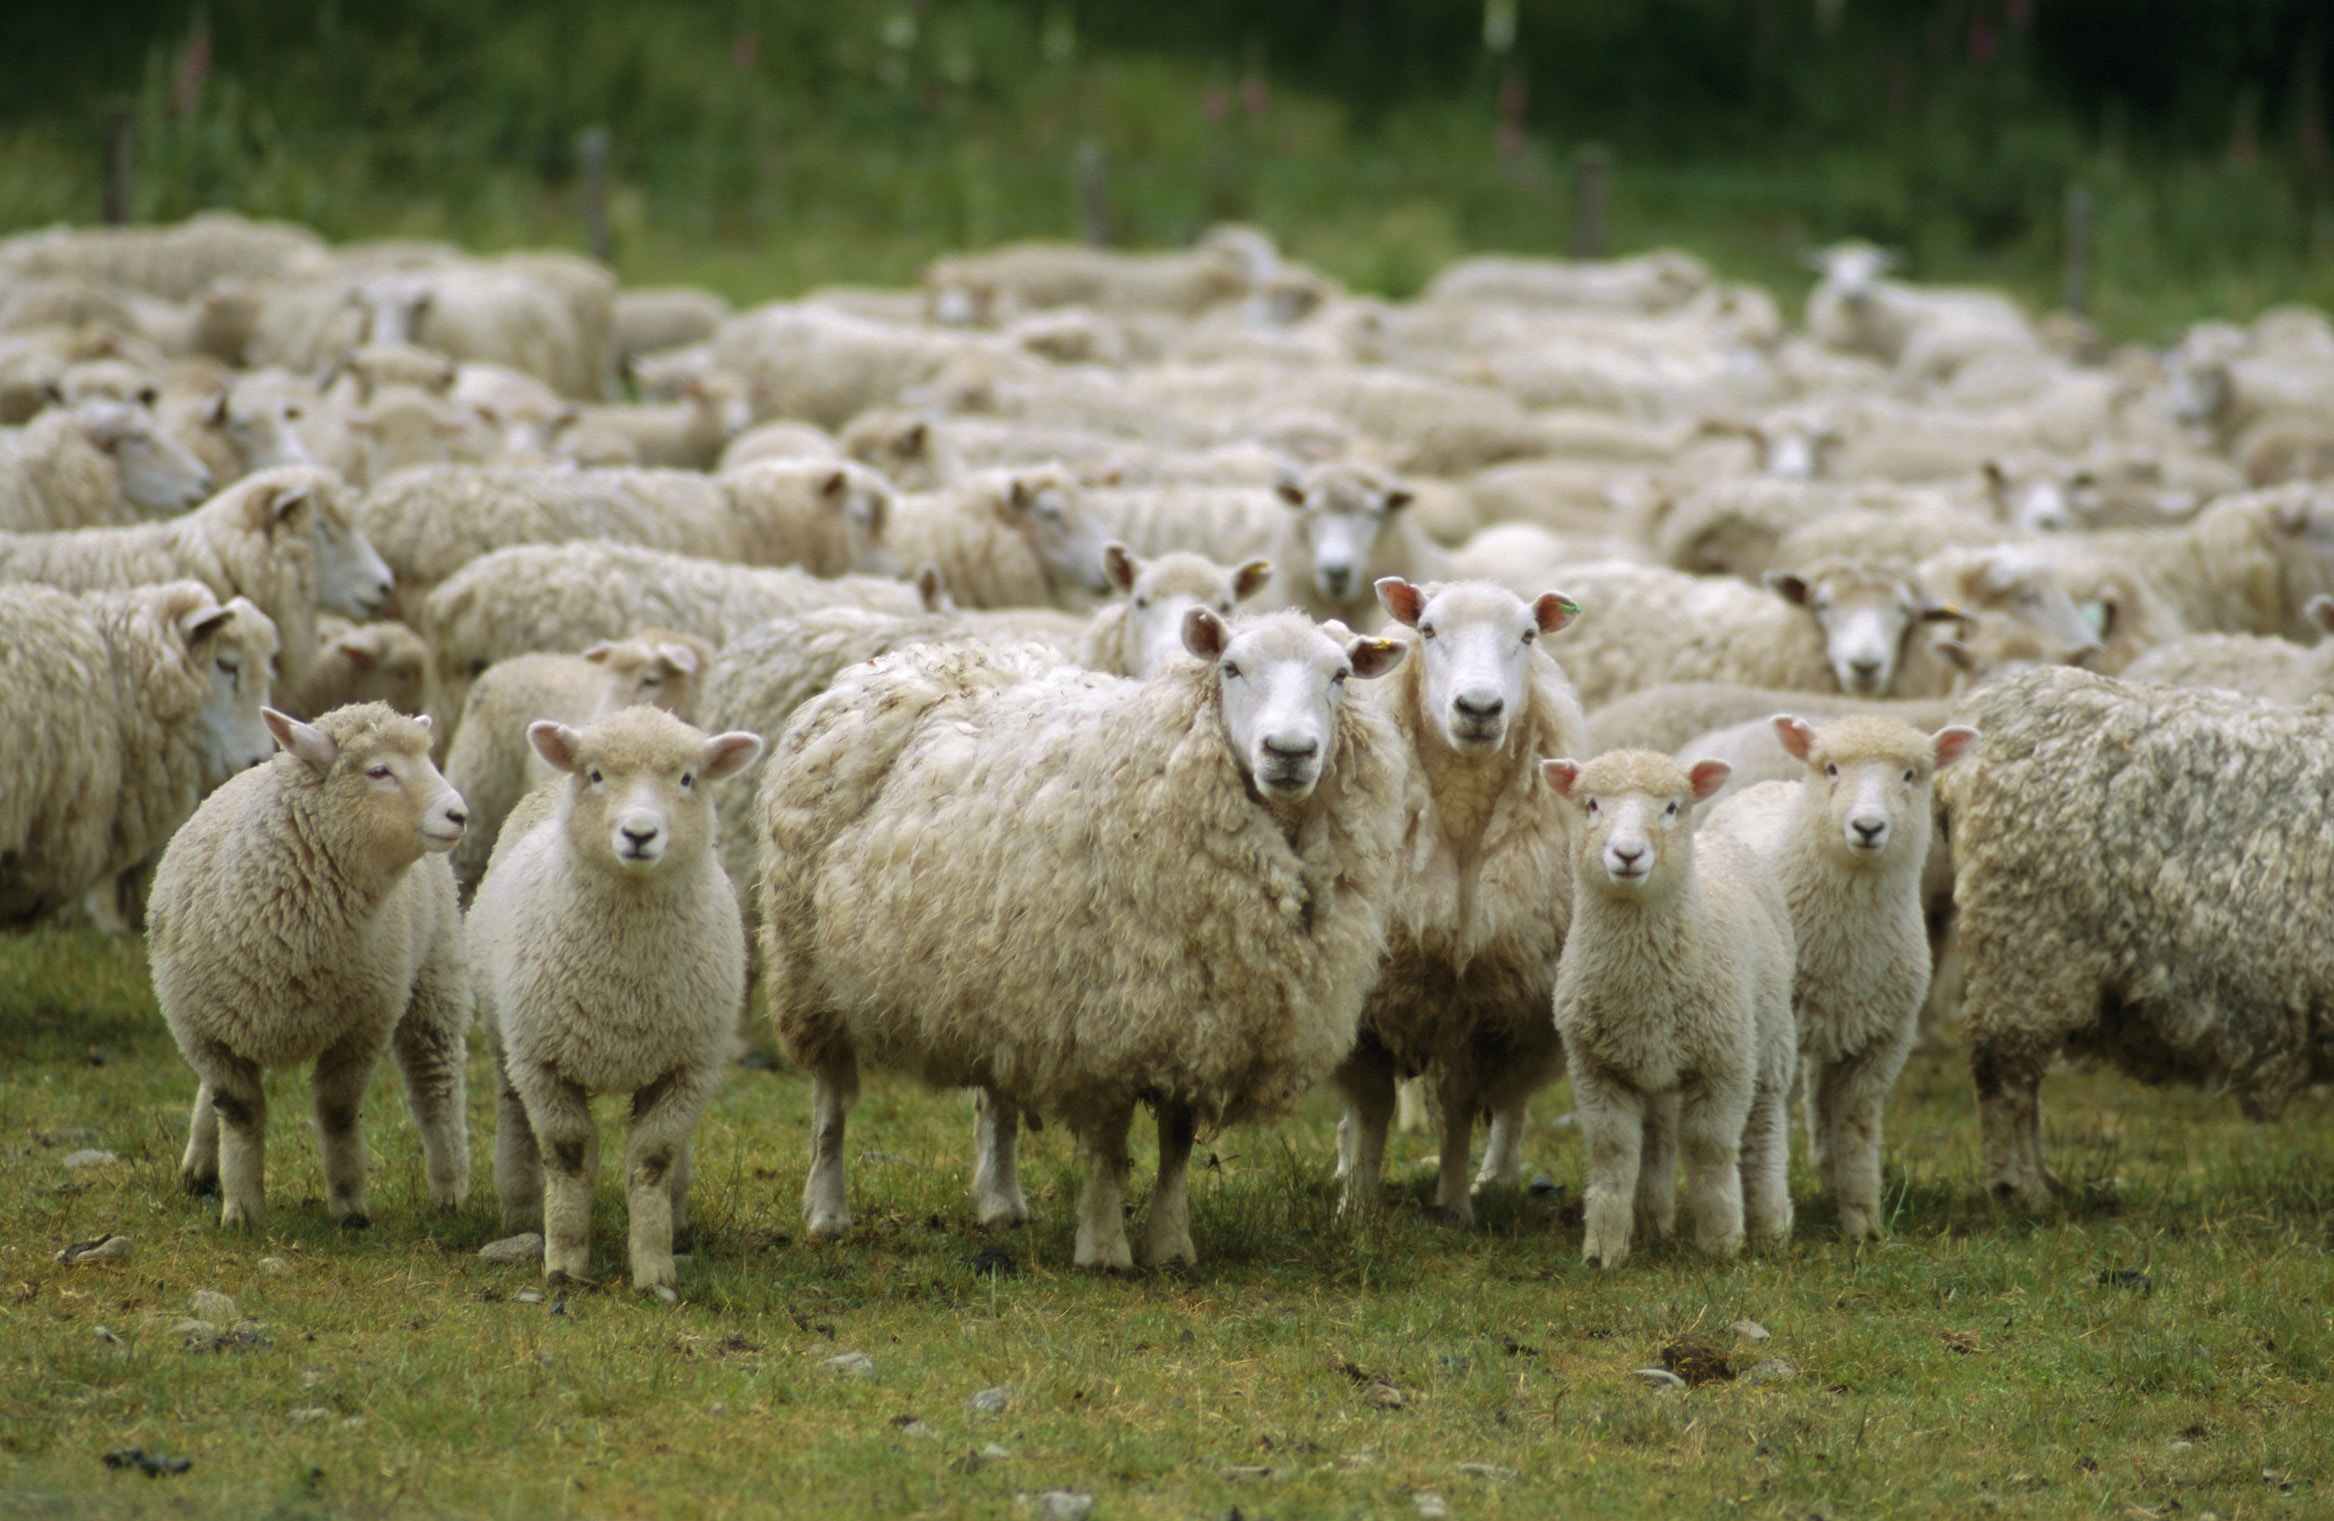 Each case of strike will increase the risk to the rest of the flock by increasing the blowfly population in the area